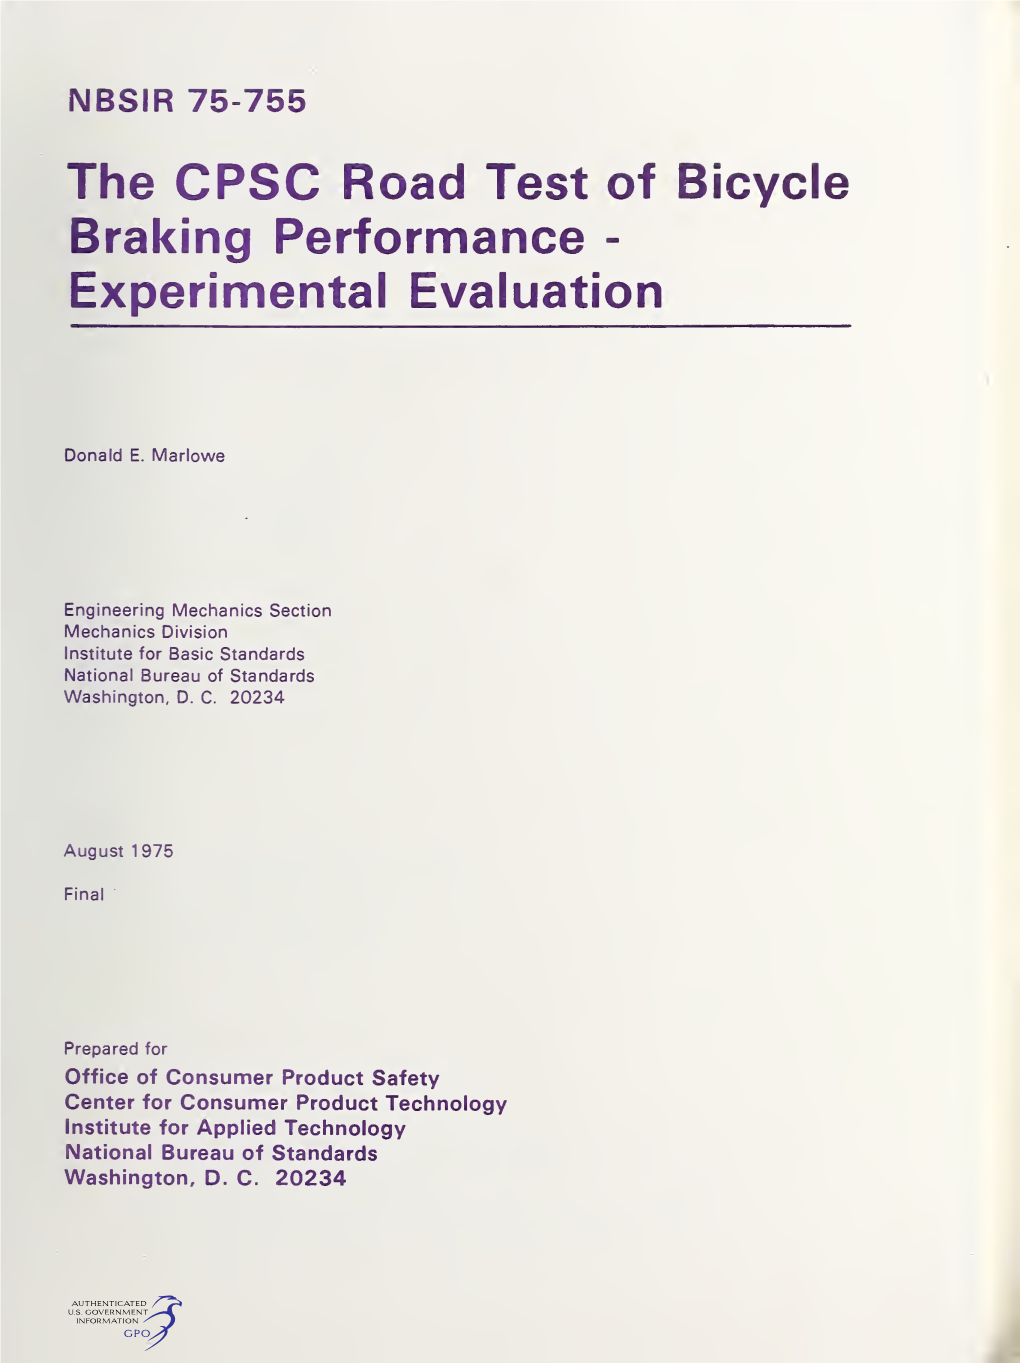 The CPSC Road Test of Bicycle Breaking Performance